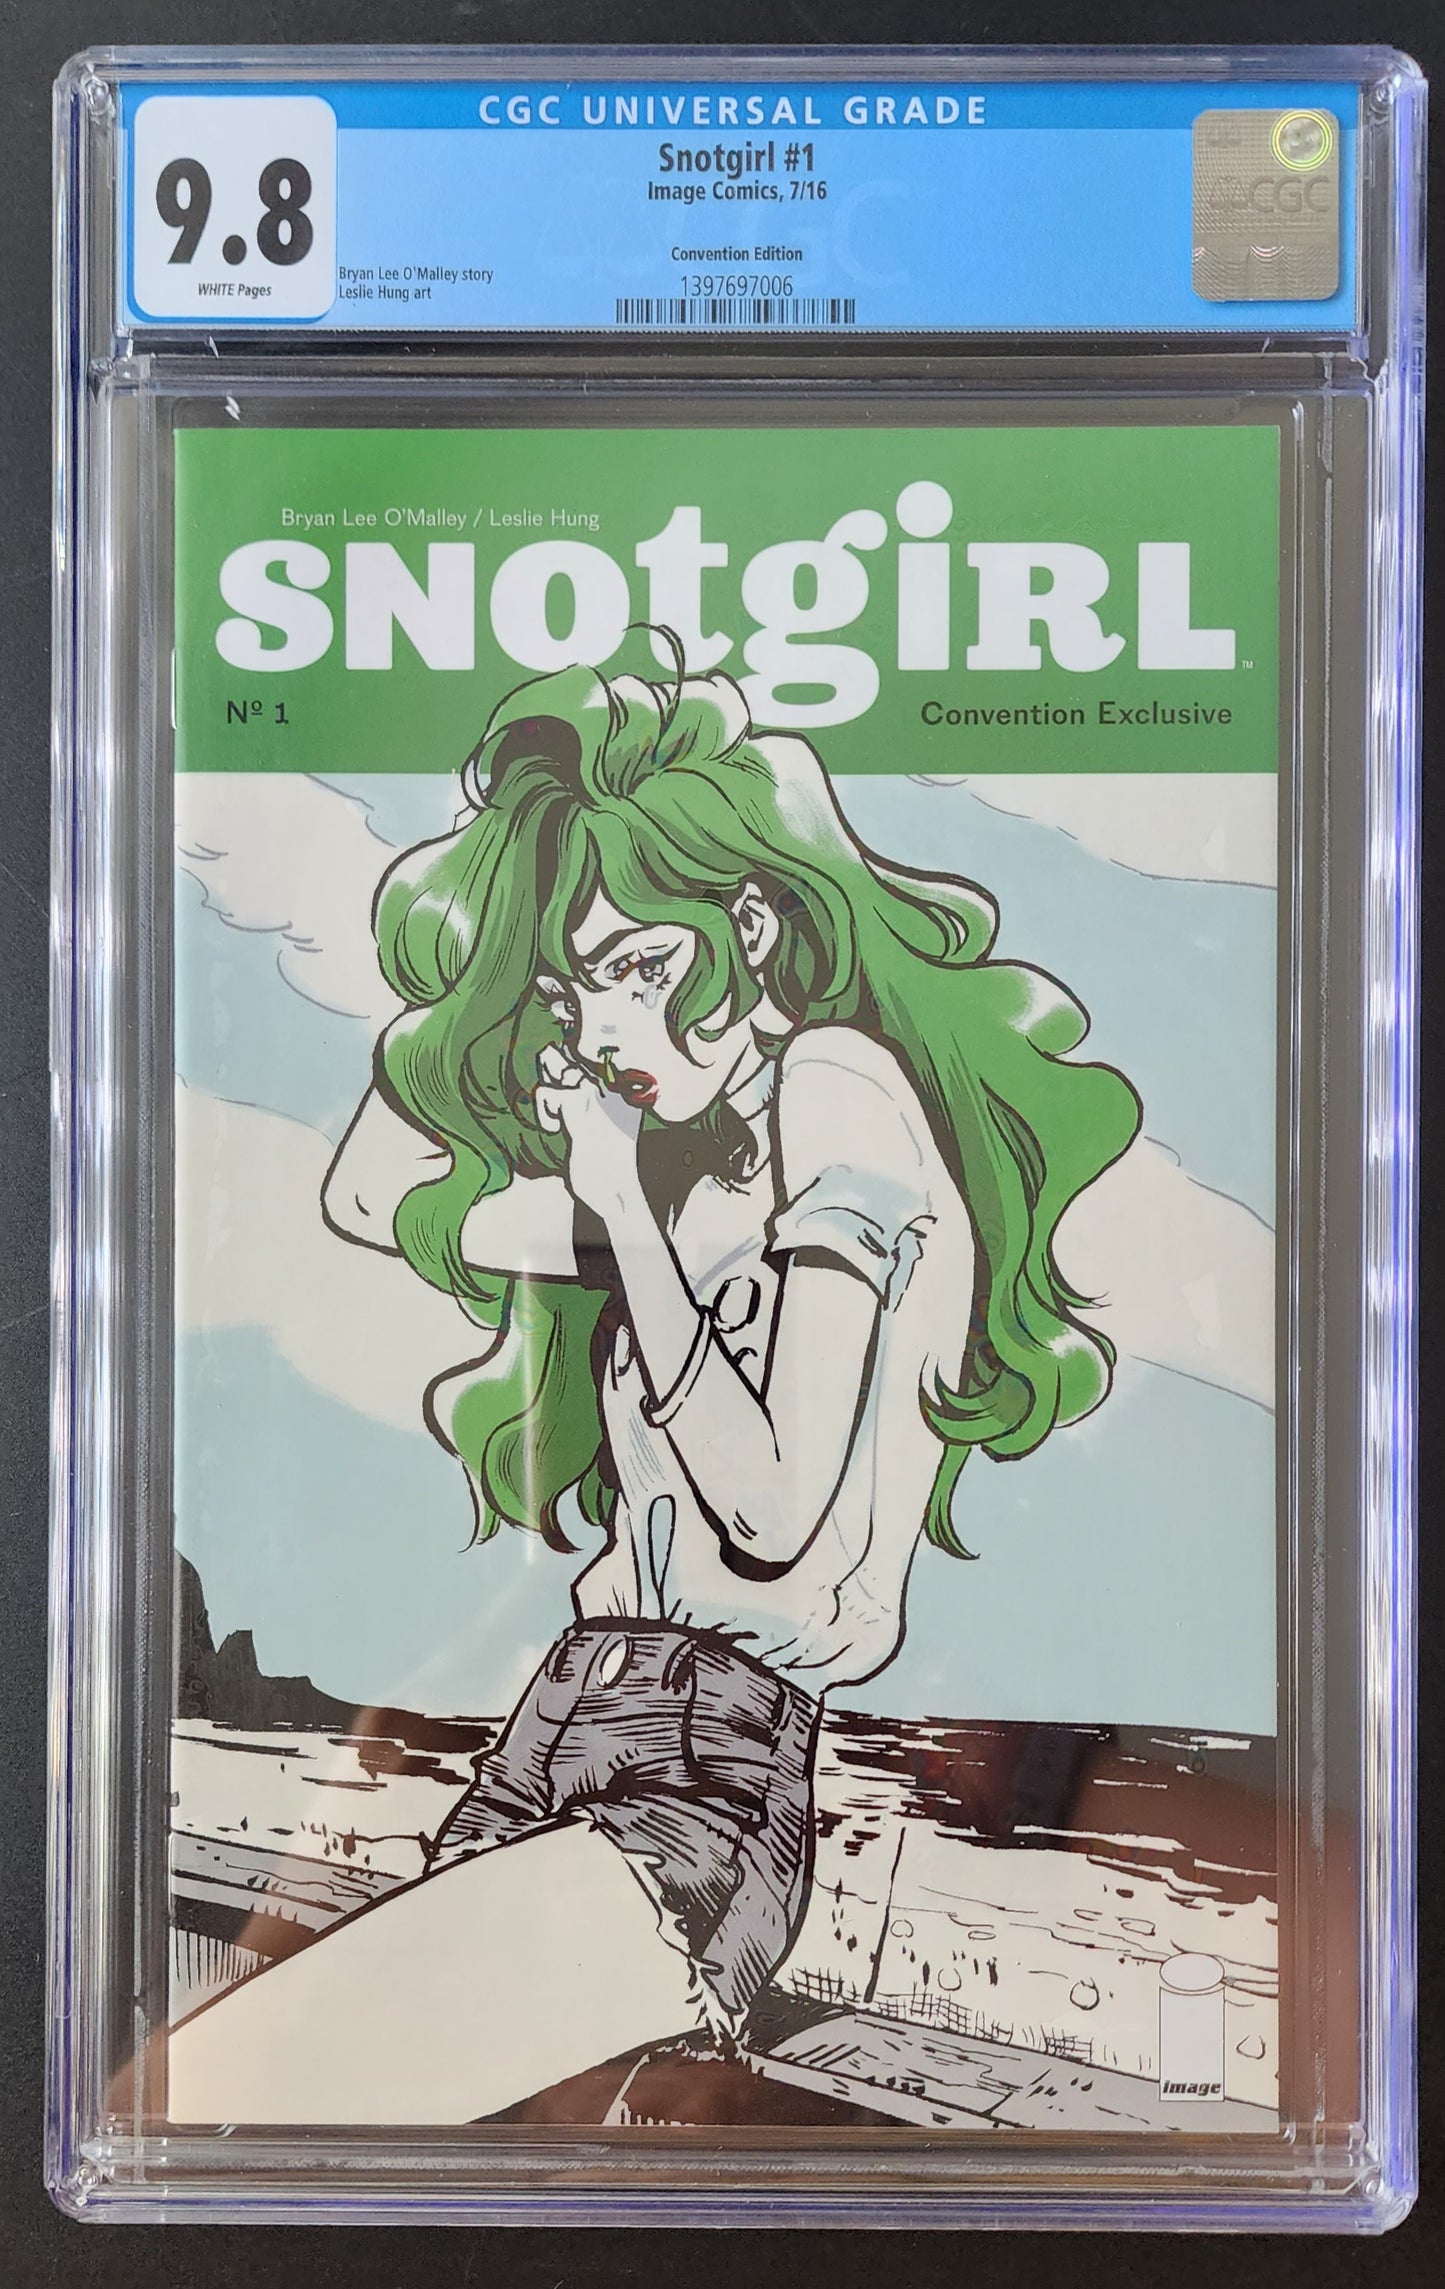 9.8 CGC SNOTGIRL #1 SDCC CONVENTION EXCLUSIVE 2016 [1397697006]